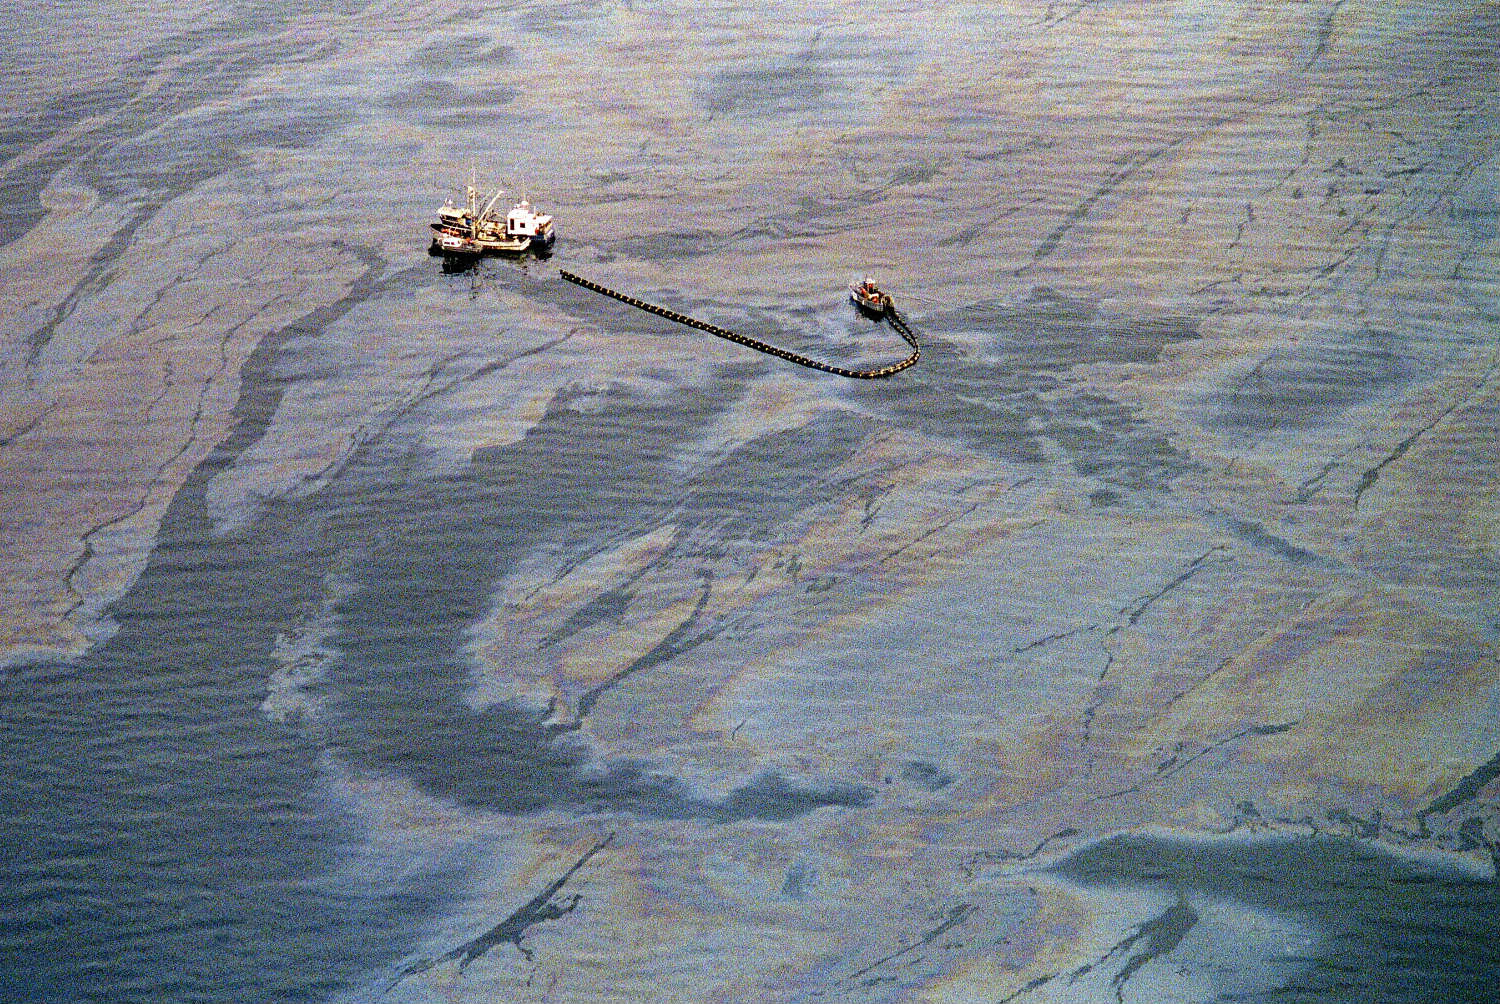 Nearly 11 million gallons of oil spilled into Prince William Sound after the 1989 Exxon Valdez spill (Chris Wilkins—AFP/Getty Images)